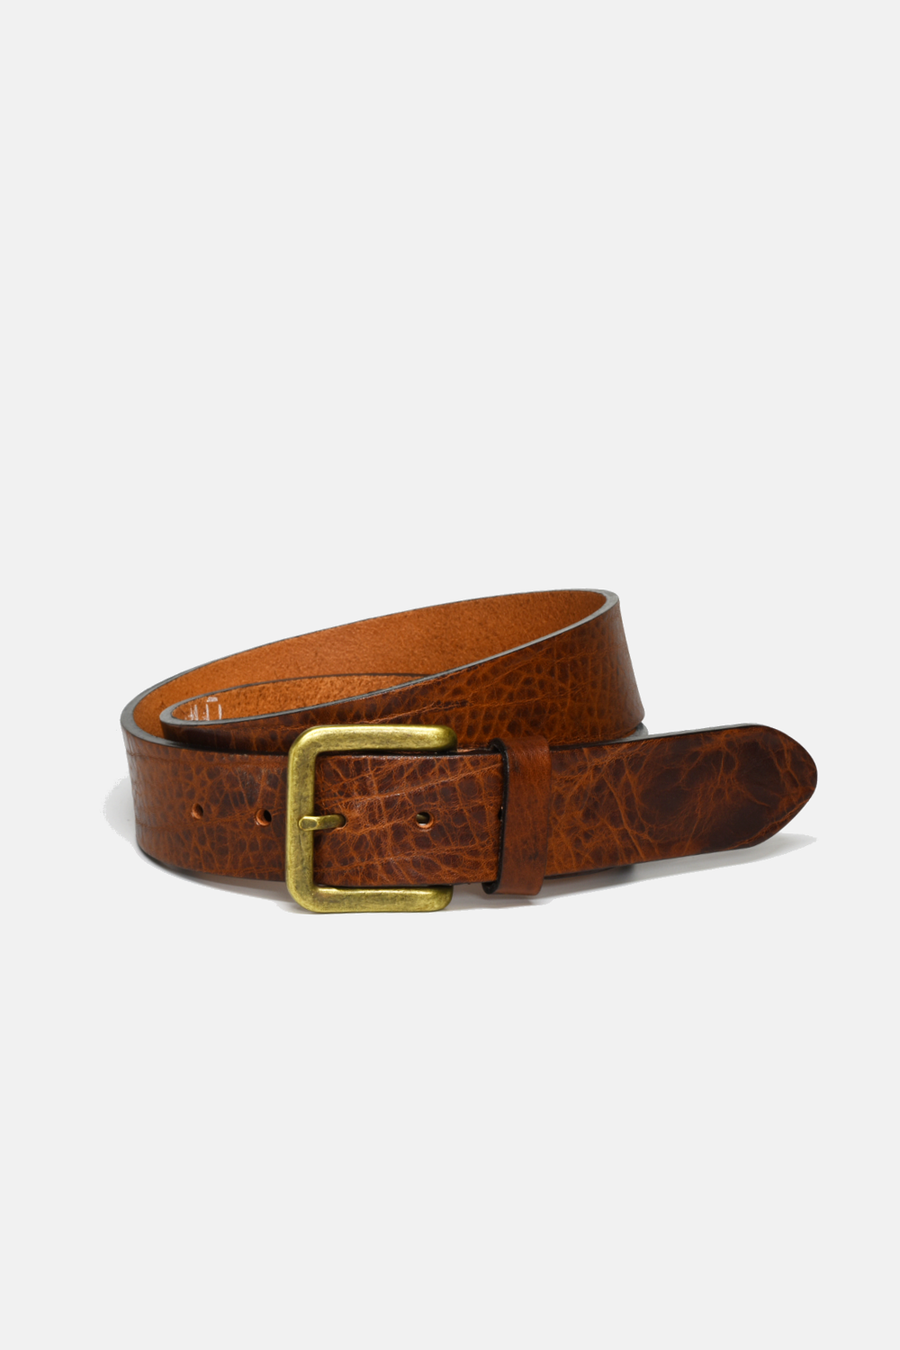 Wide Dark Brown Leather with Brass Buckle Belt: Small